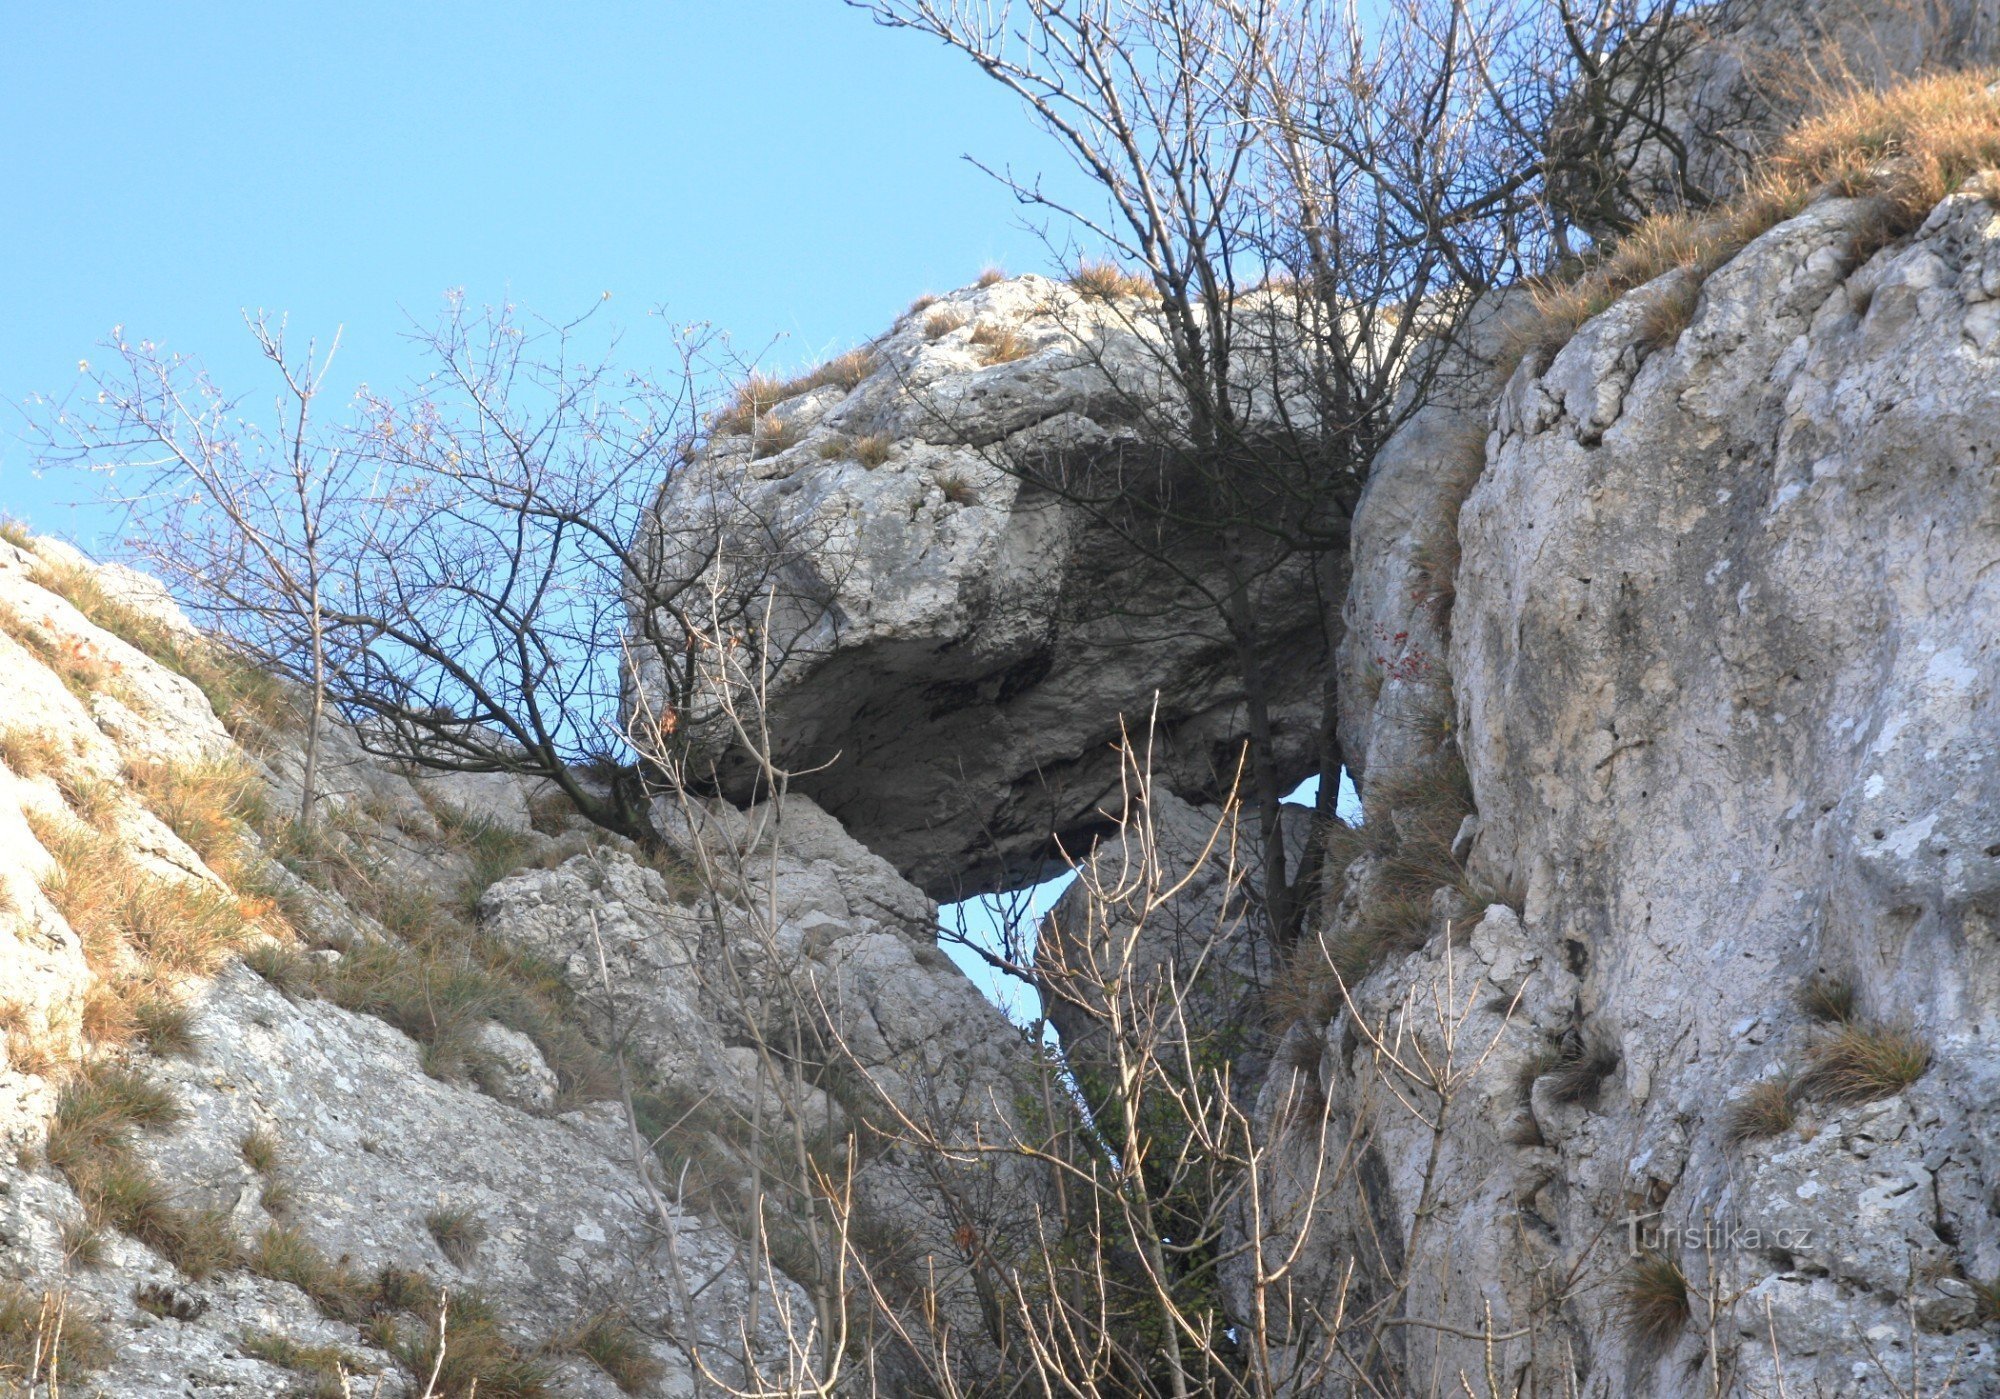 Detail of the rock block above the cave